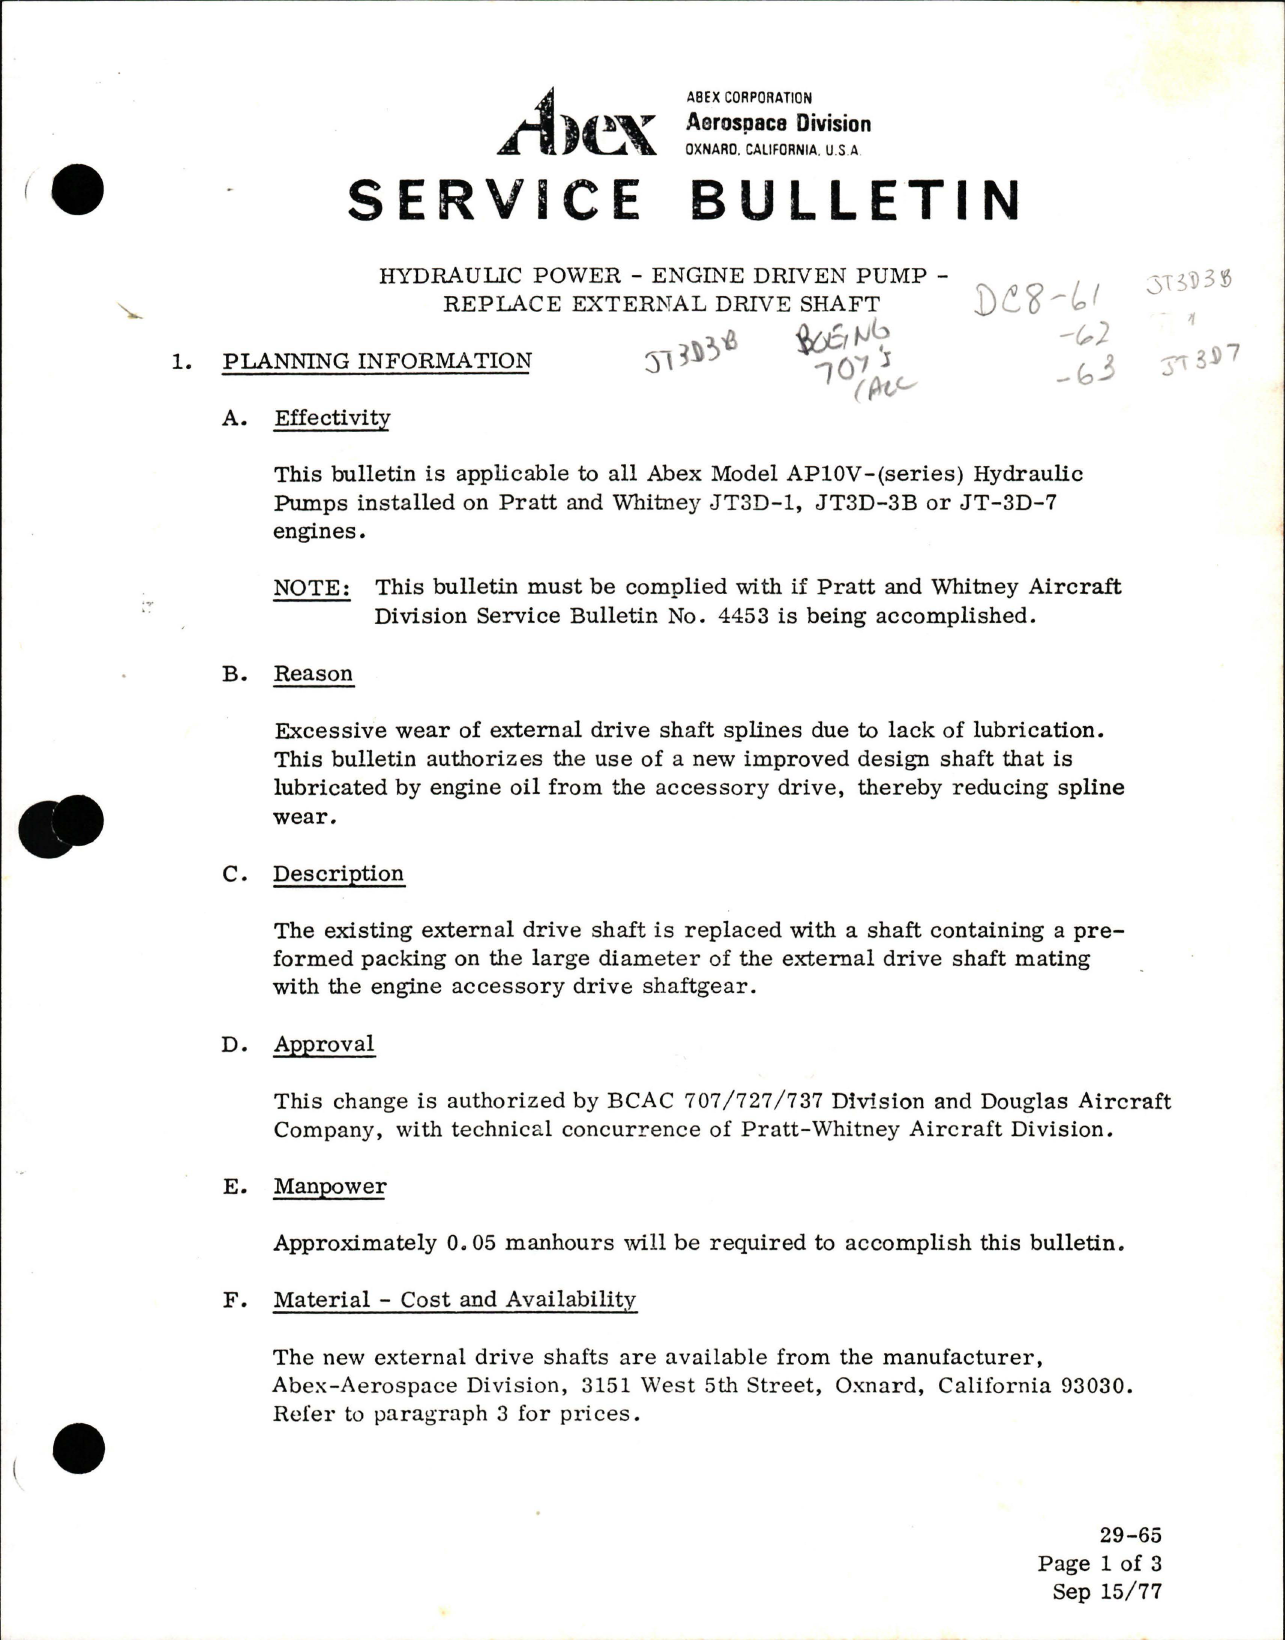 Sample page 1 from AirCorps Library document: Replace External Drive Shaft for Hydraulic Pump